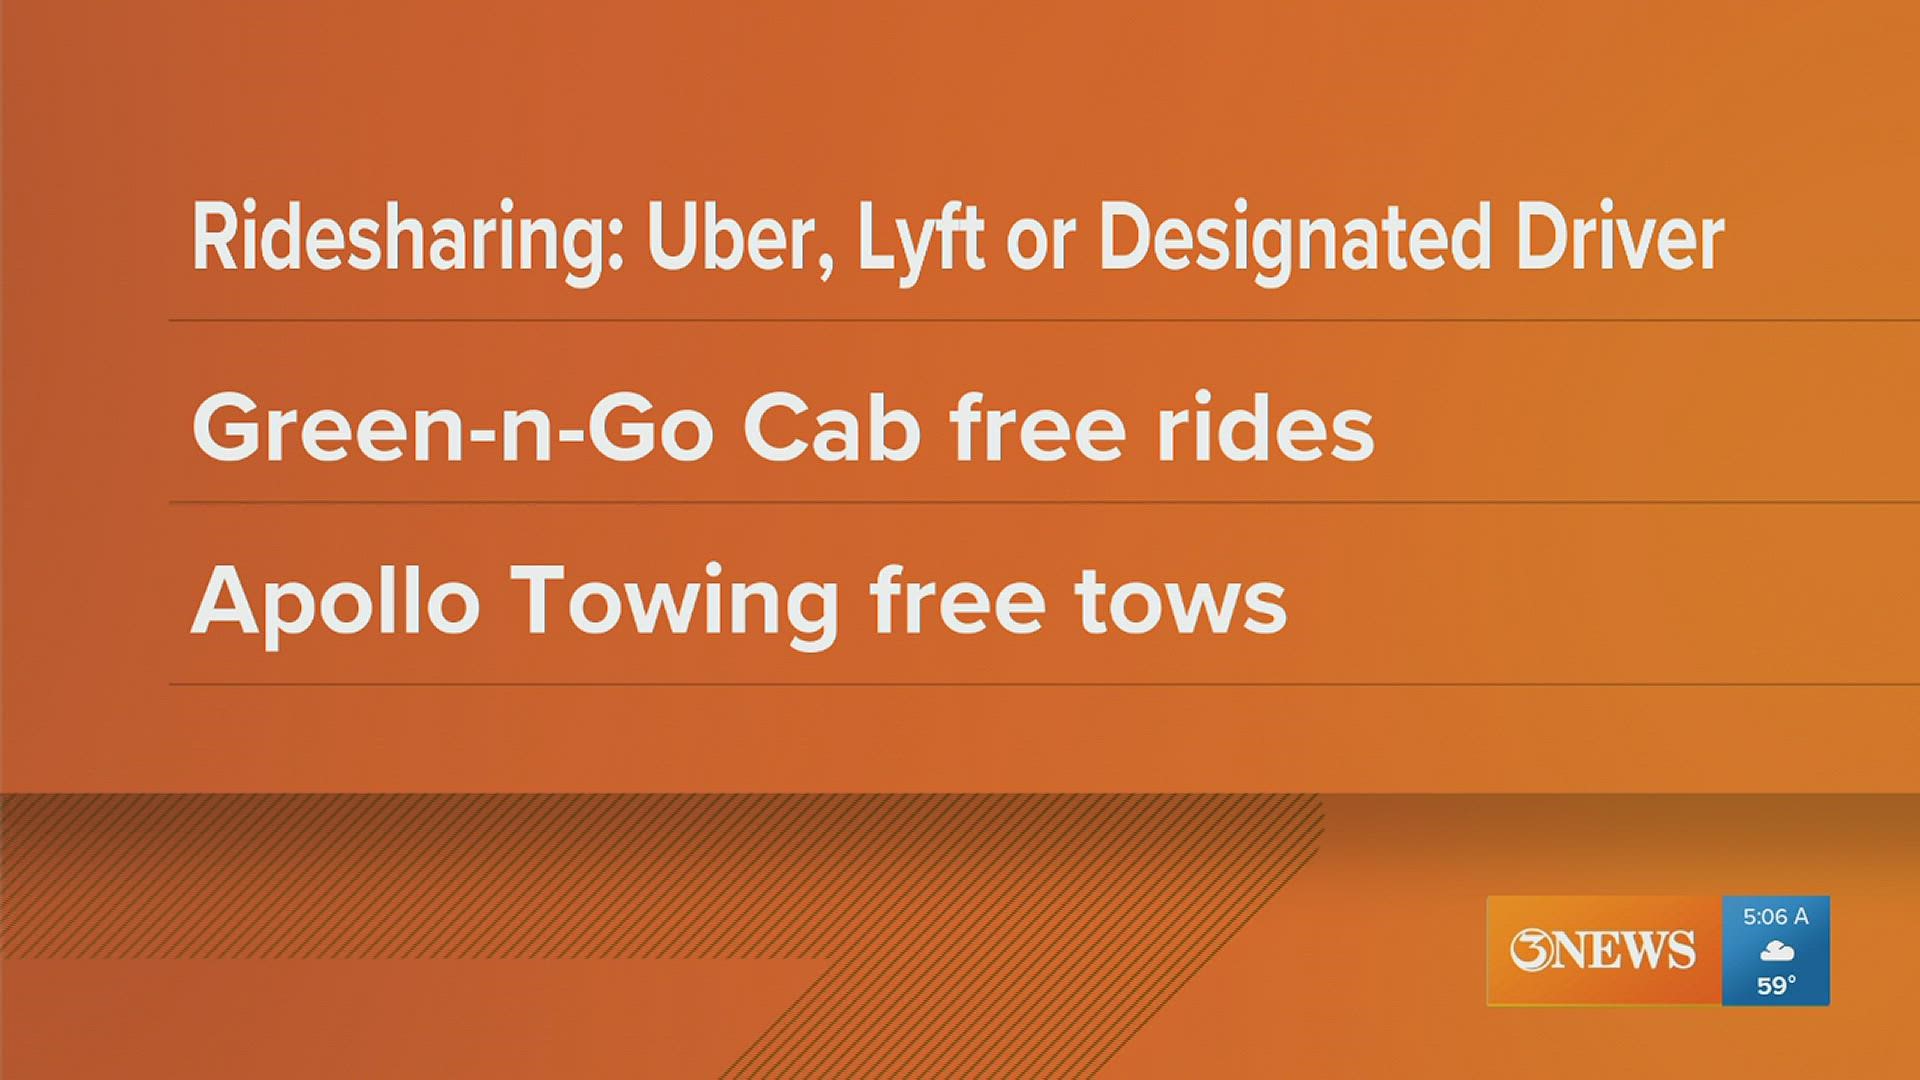 Apollo Towing is offering a free ride and tow and Green-N-Go cabs are also offering free rides.